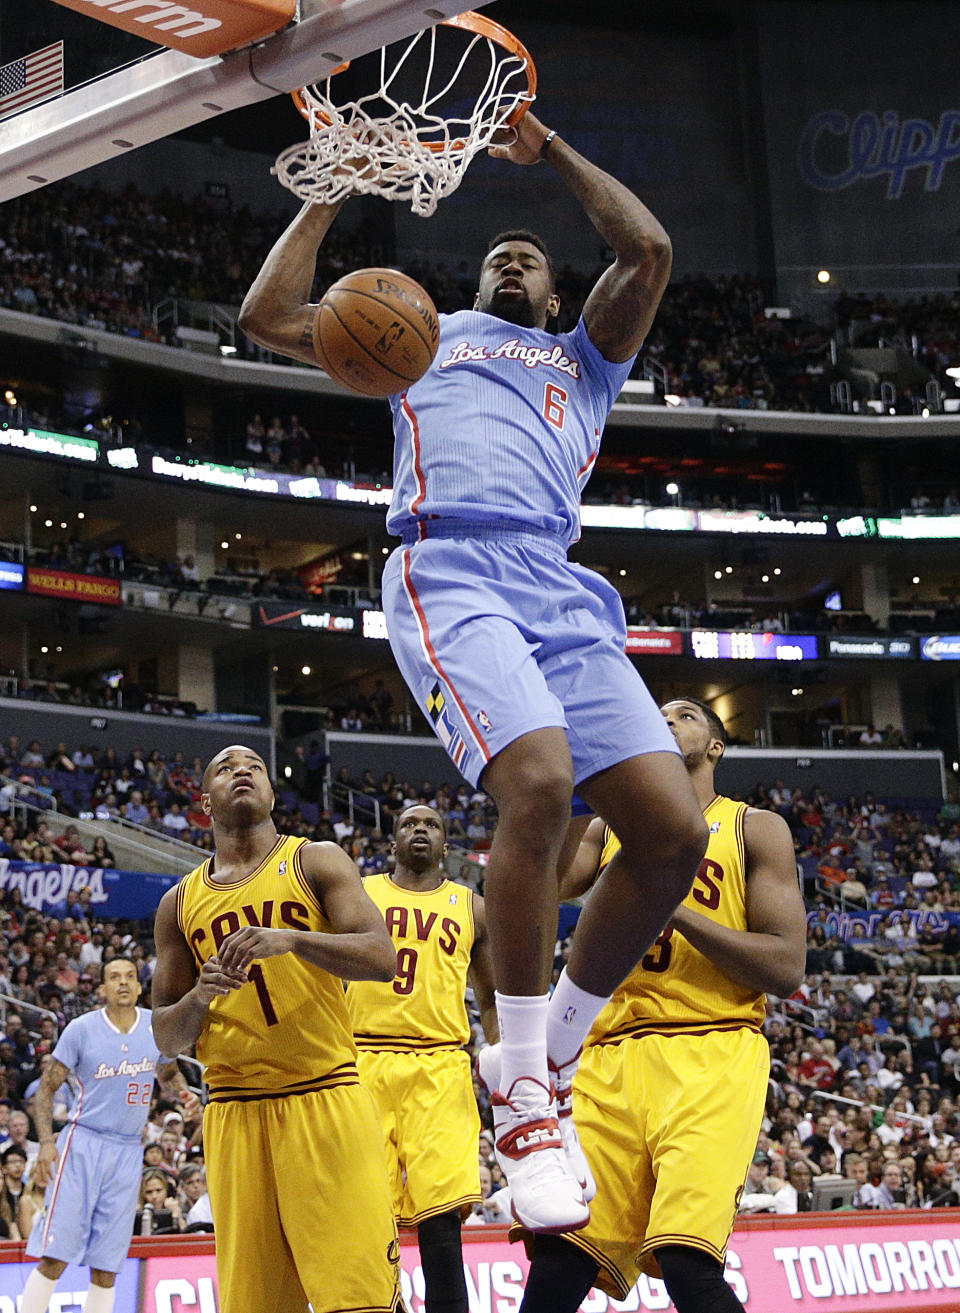 Los Angeles Clippers's DeAndre Jordan, top, makes a dunk as Cleveland Cavaliers's Jarrett Jack, left, and Tristan Thompson, right, watch during the first half of an NBA basketball game on Sunday, March 16, 2014, in Los Angeles. (AP Photo/Jae C. Hong)